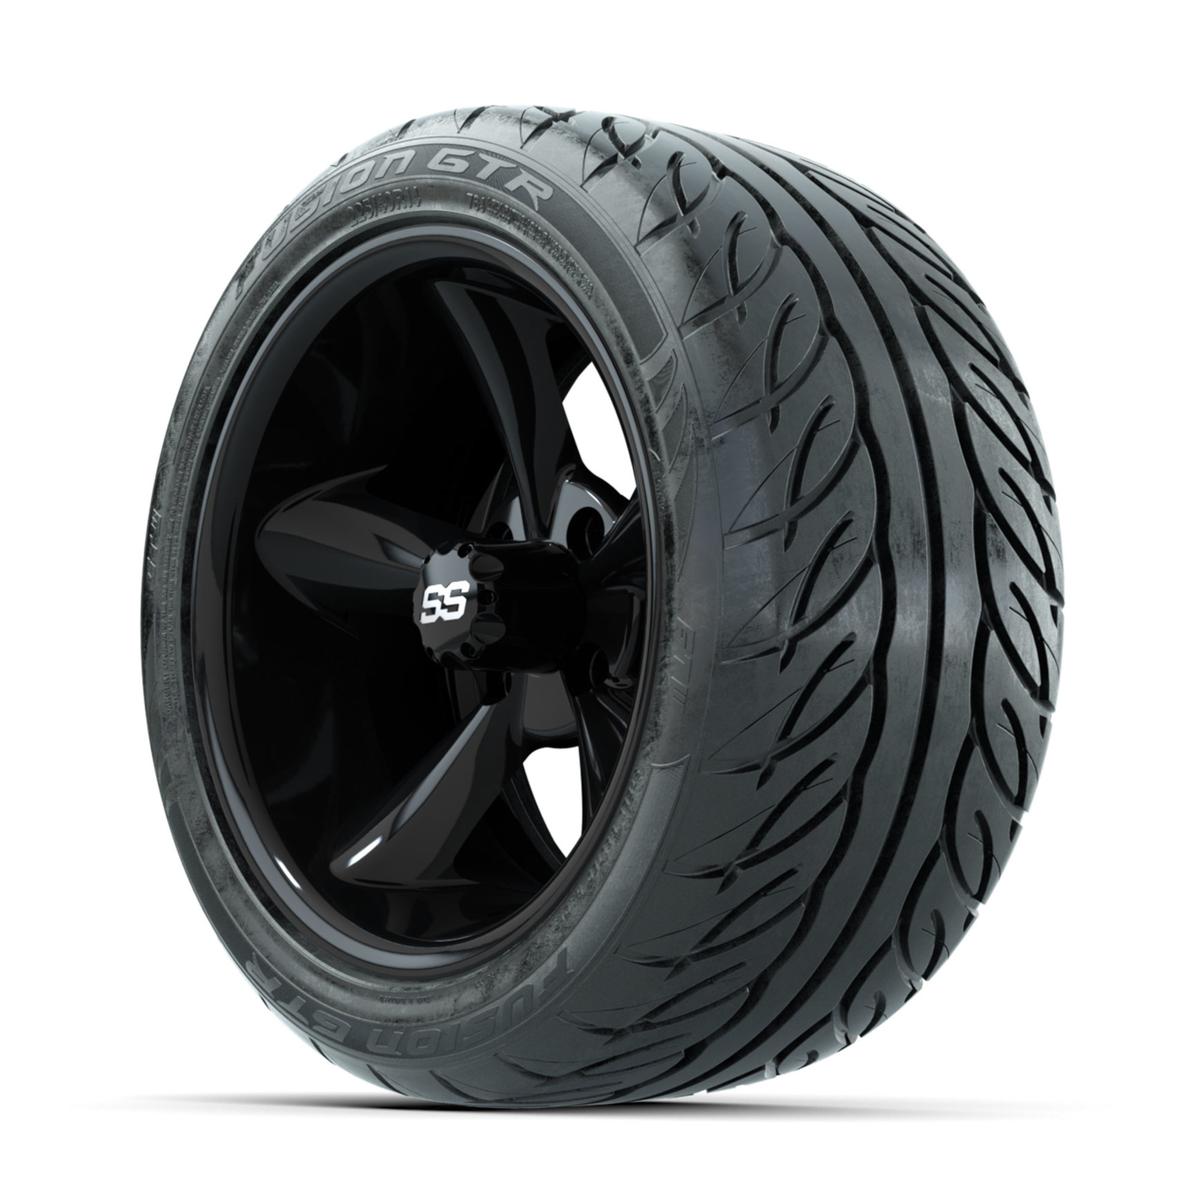 GTW Godfather Black 14 in Wheels with 225/40-R14 Fusion GTR Street Tires – Full Set